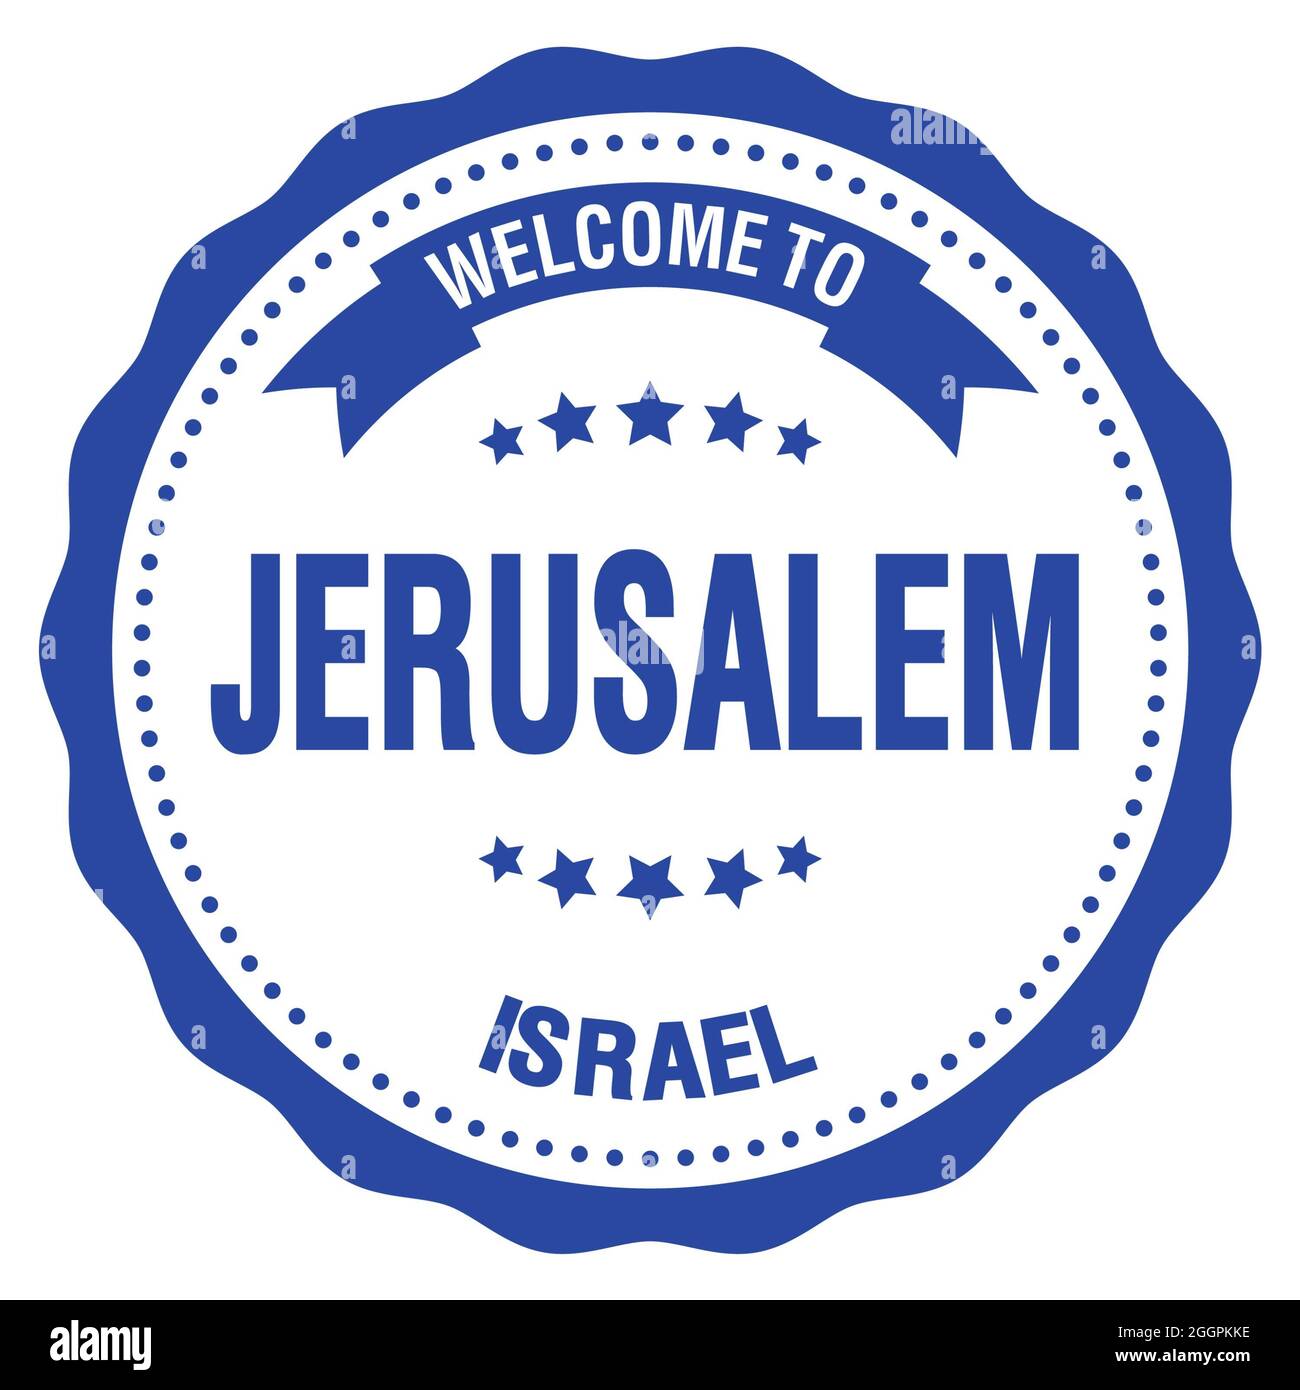 WELCOME TO JERUSALEM - ISRAEL, words written on blue round badge stamp ...